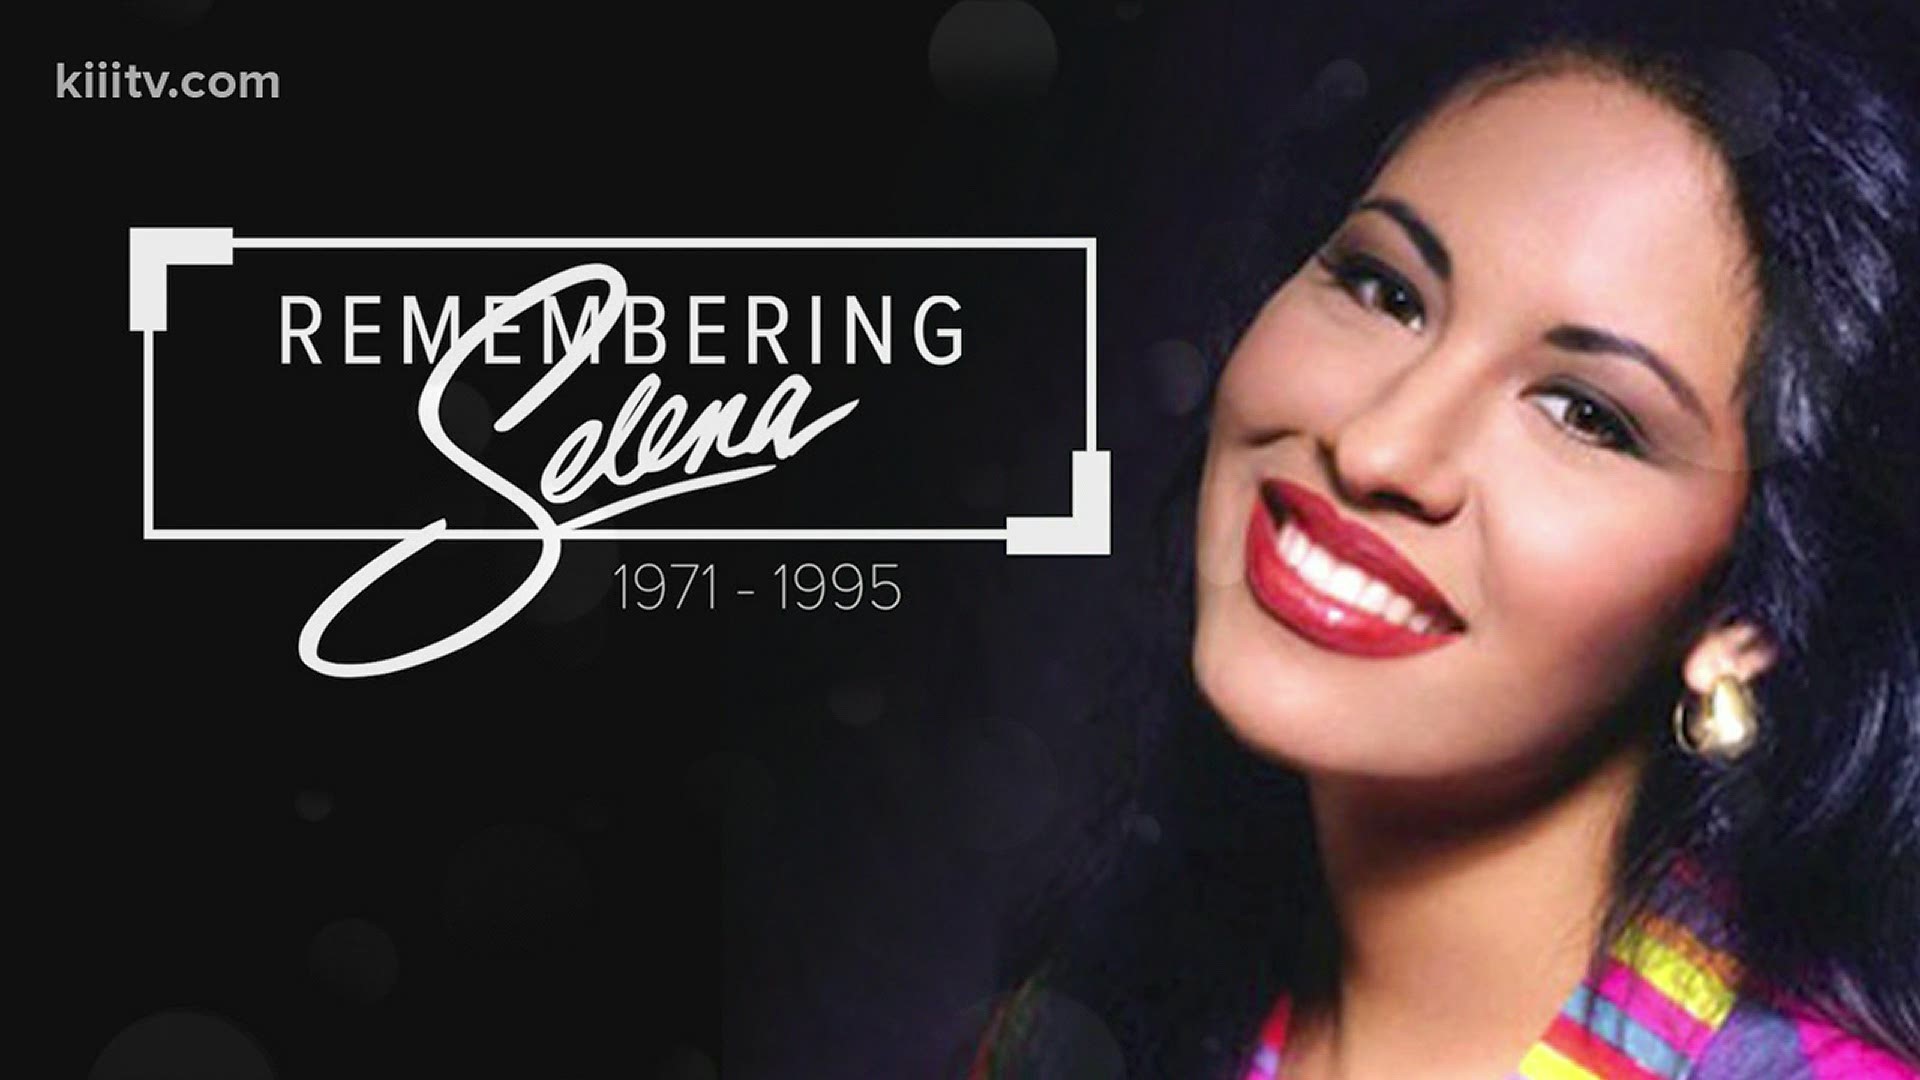 She managed to endear not only Latinos and Mexican Americans, but generations around the world.